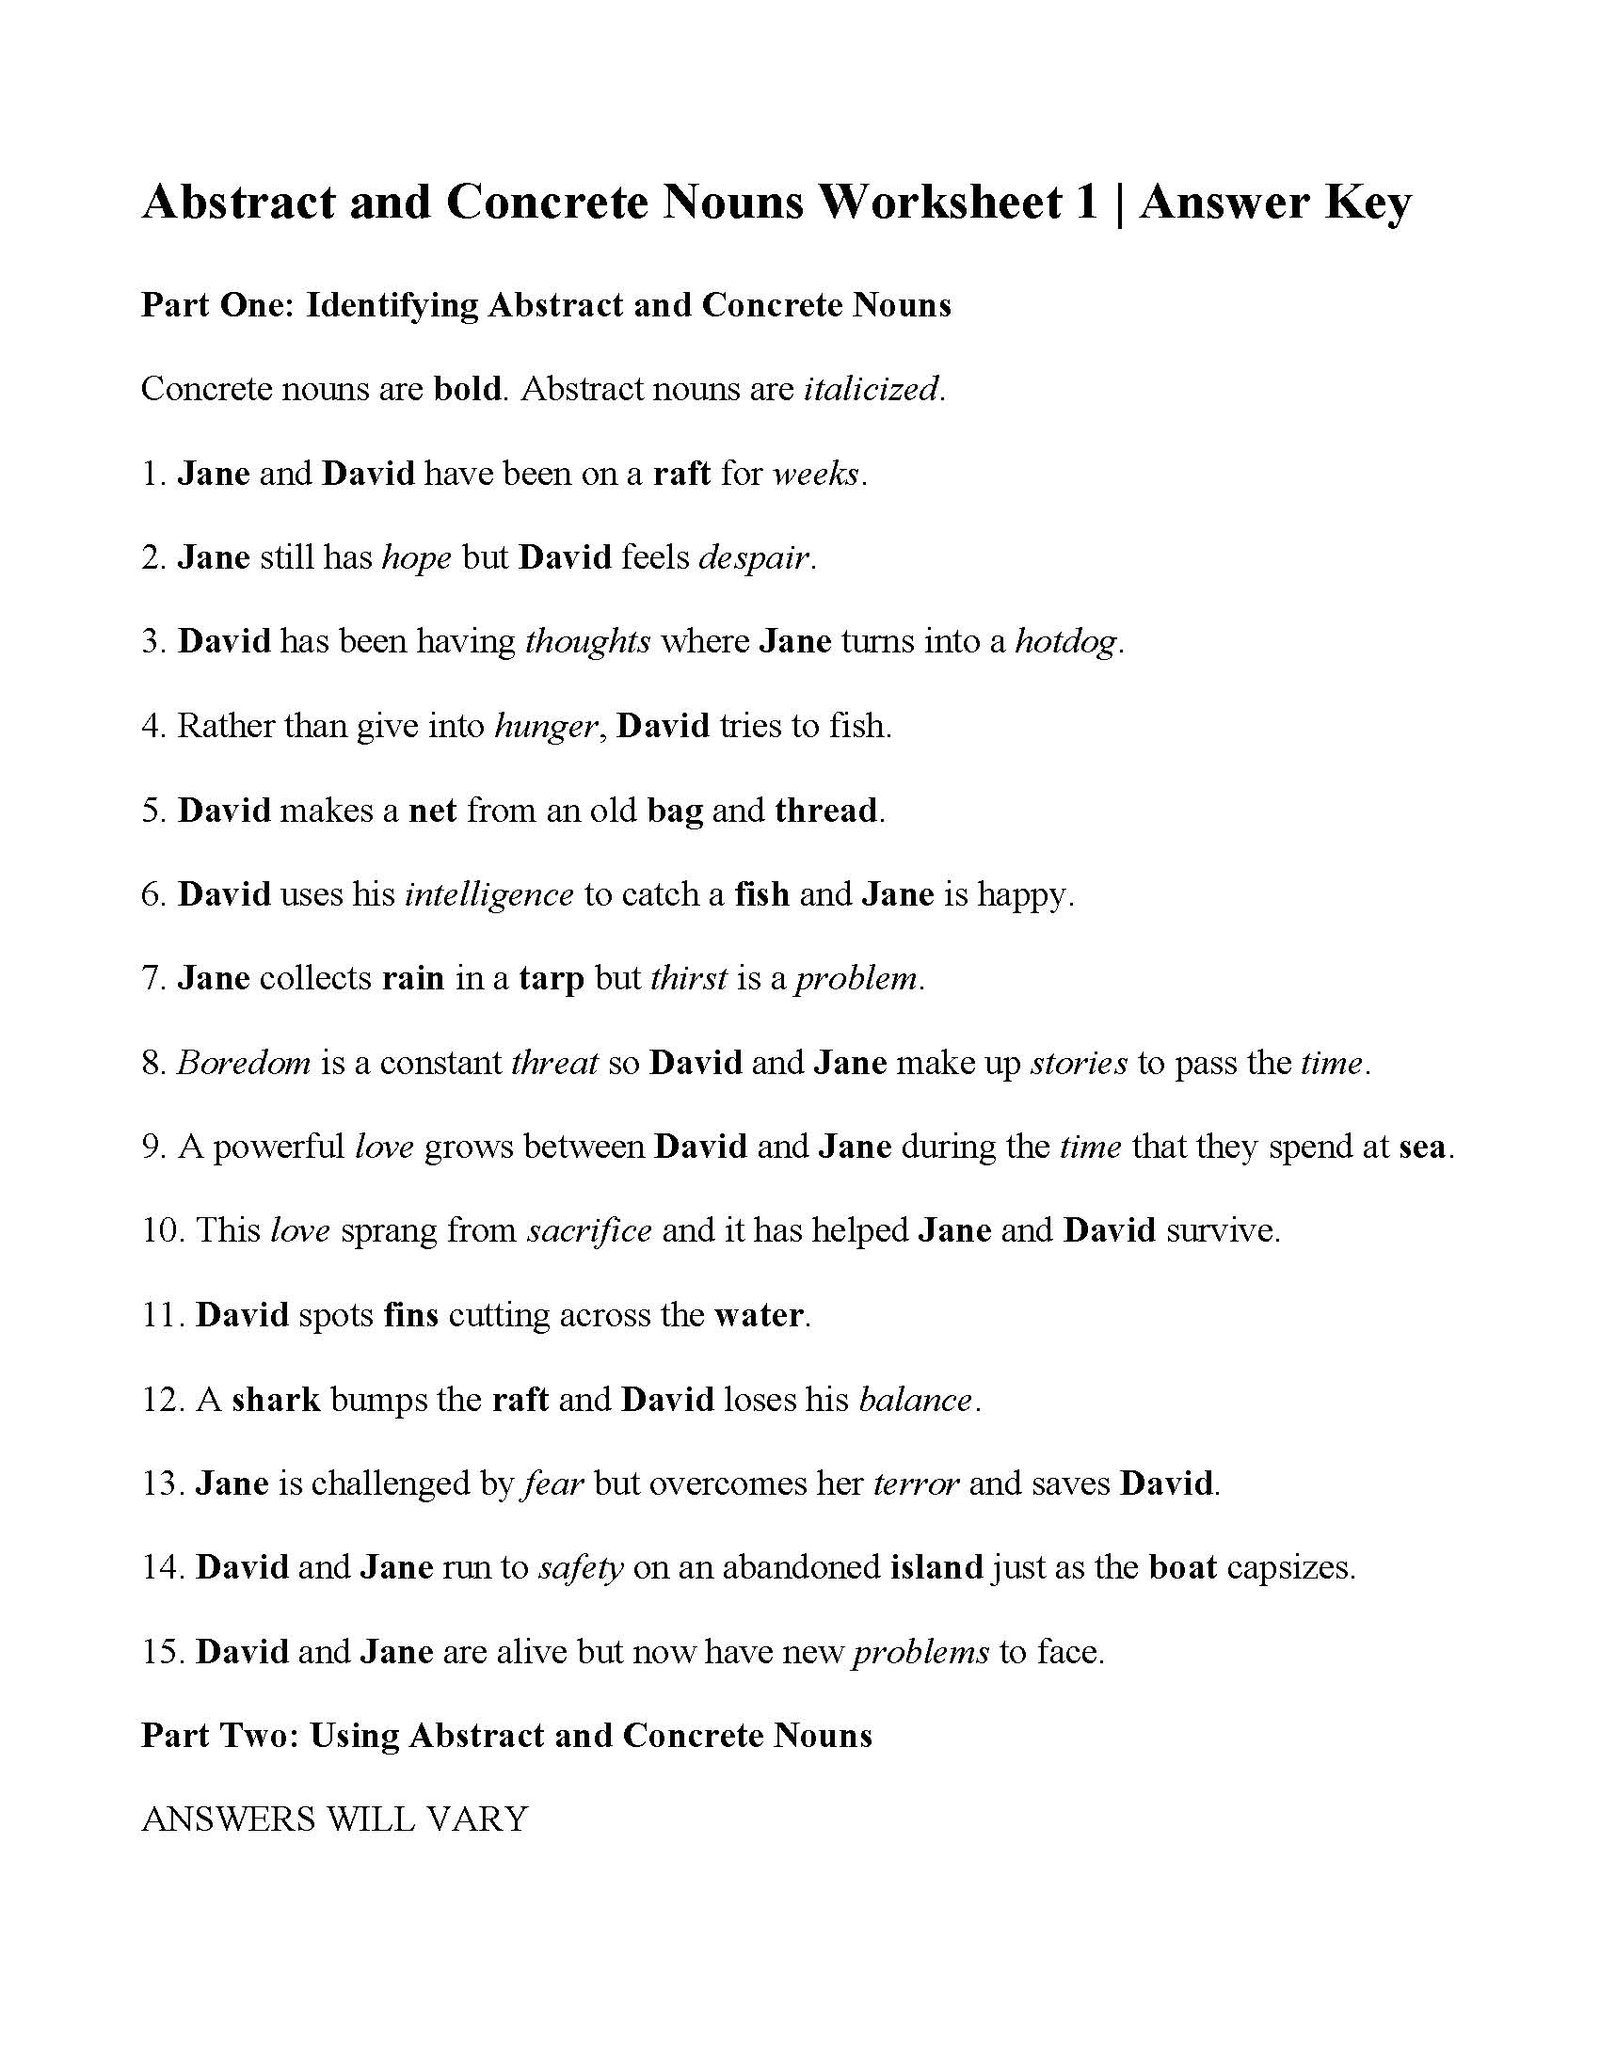 Worksheet On Concrete And Abstract Nouns Pdf